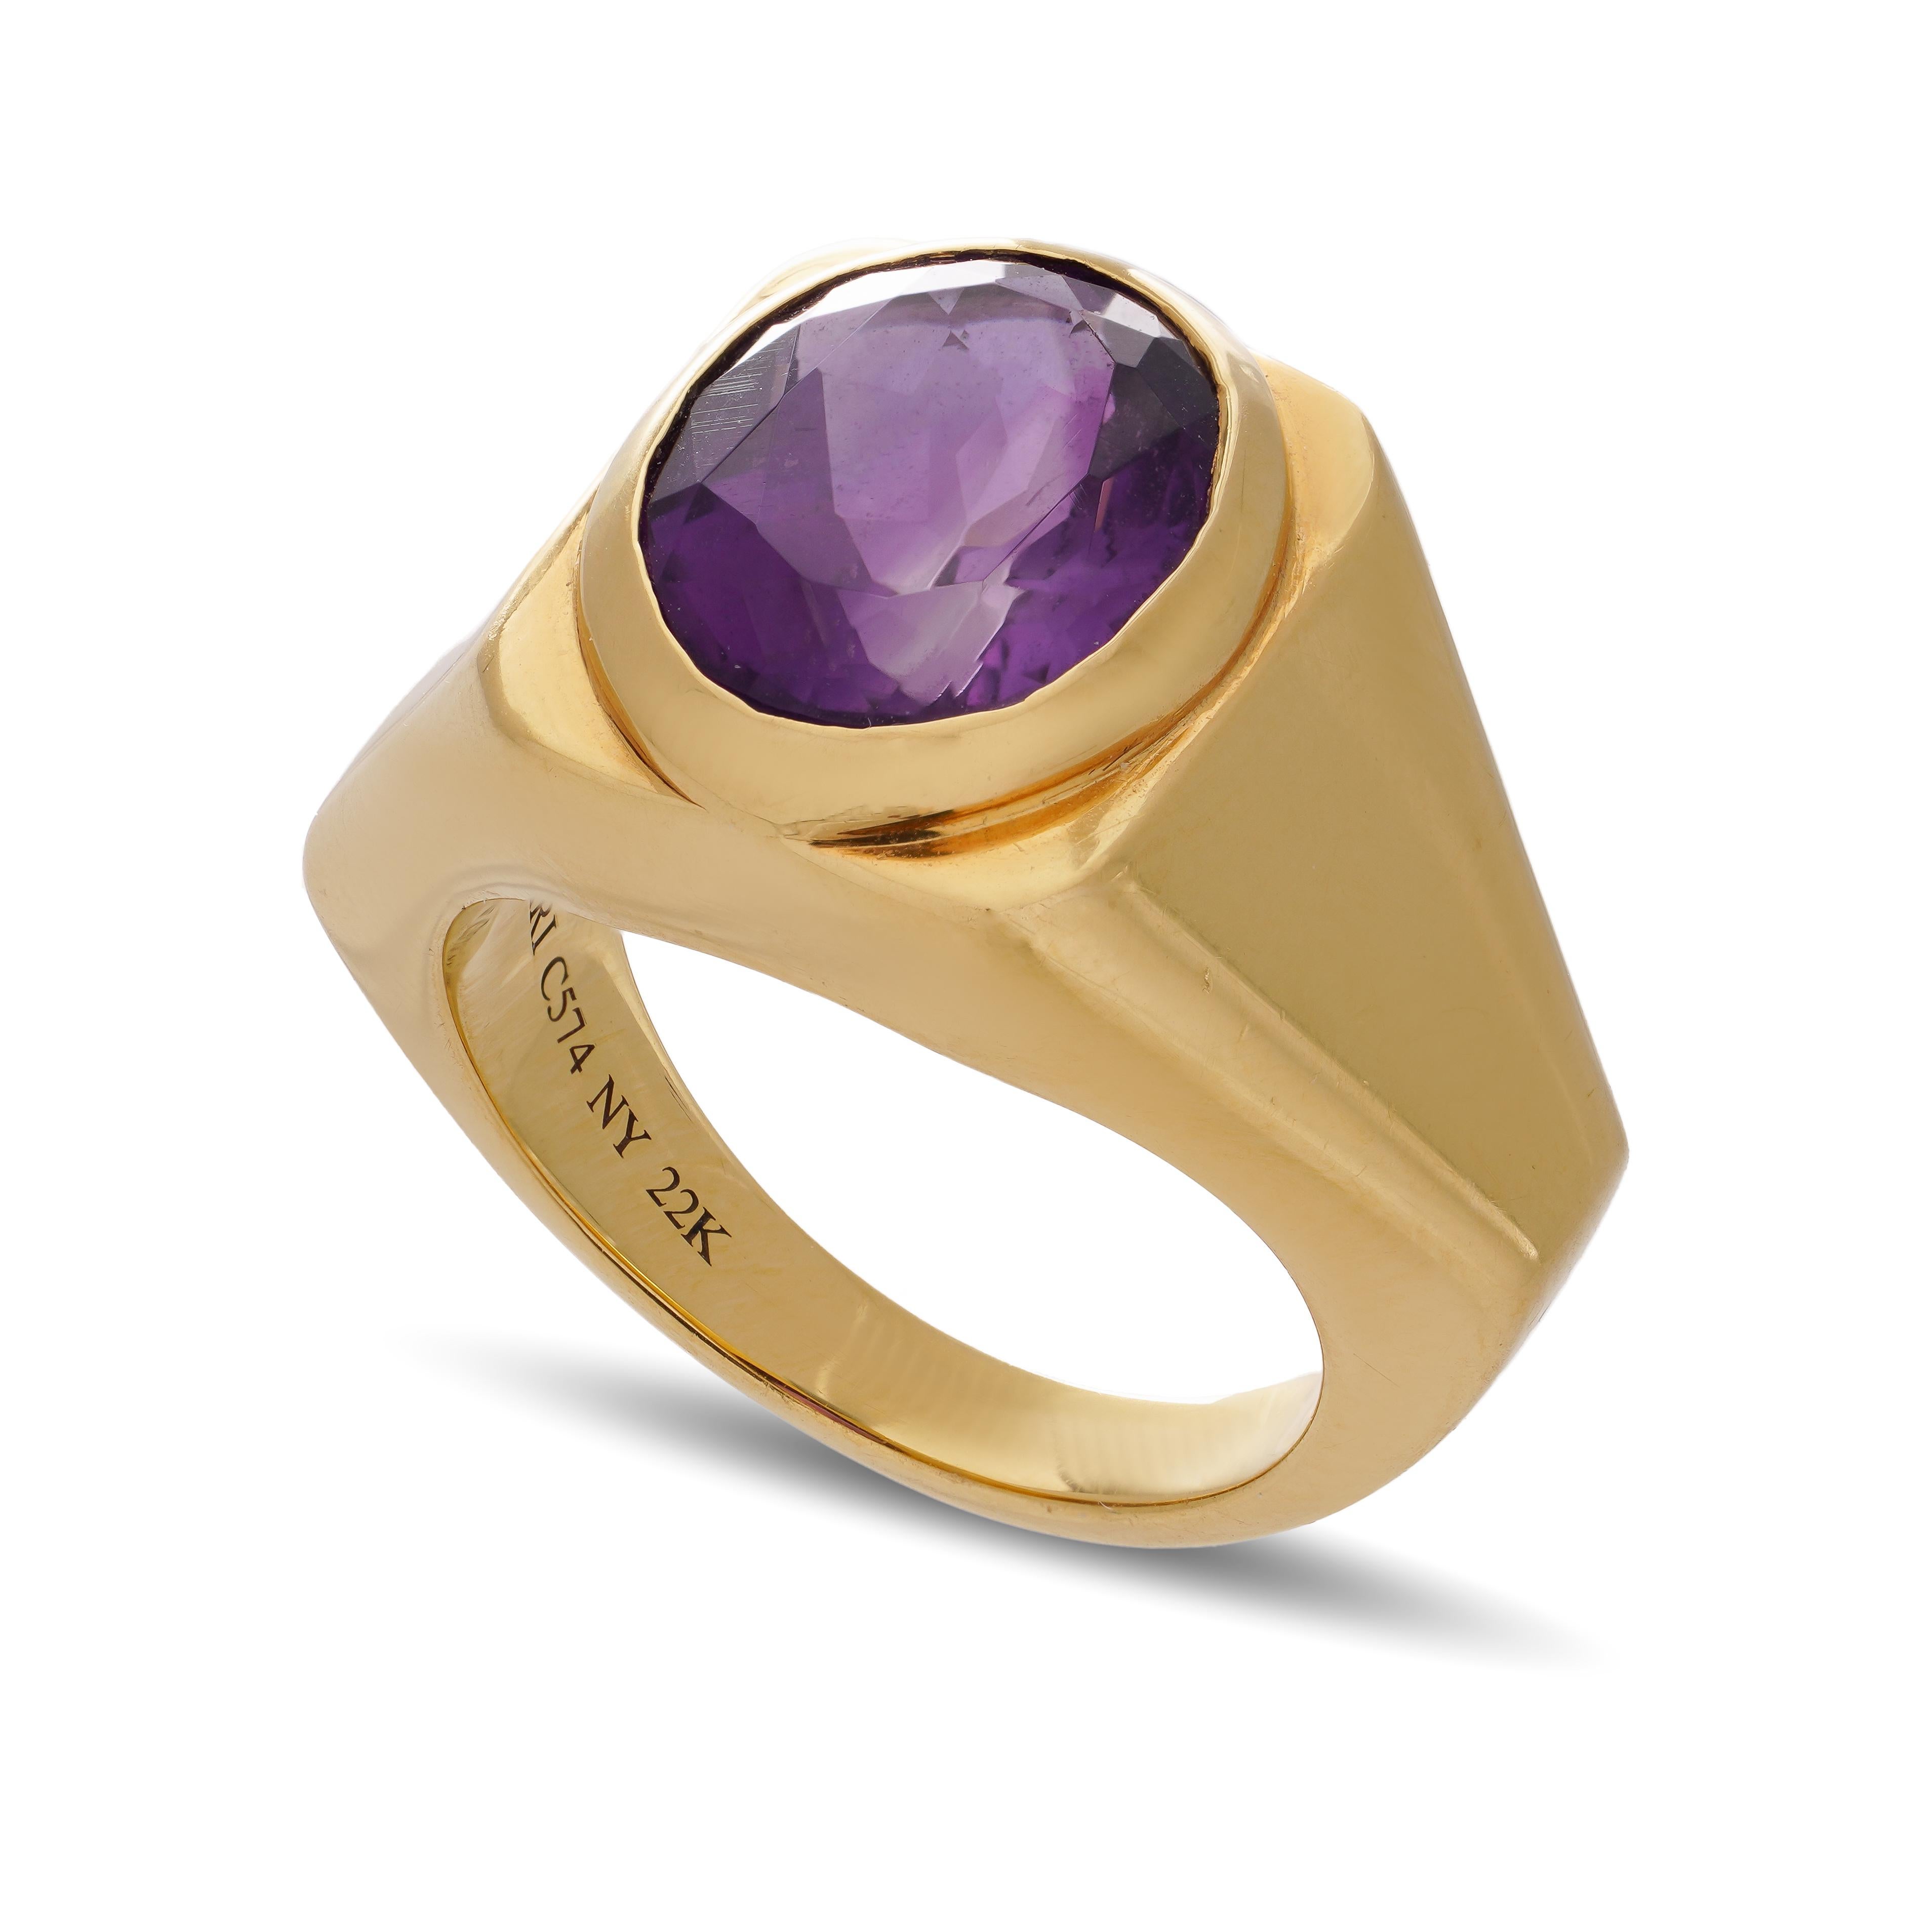 Bvlgari 22kt. yellow gold geometric band ring set with an oval-cut amethyst In Good Condition For Sale In Braintree, GB